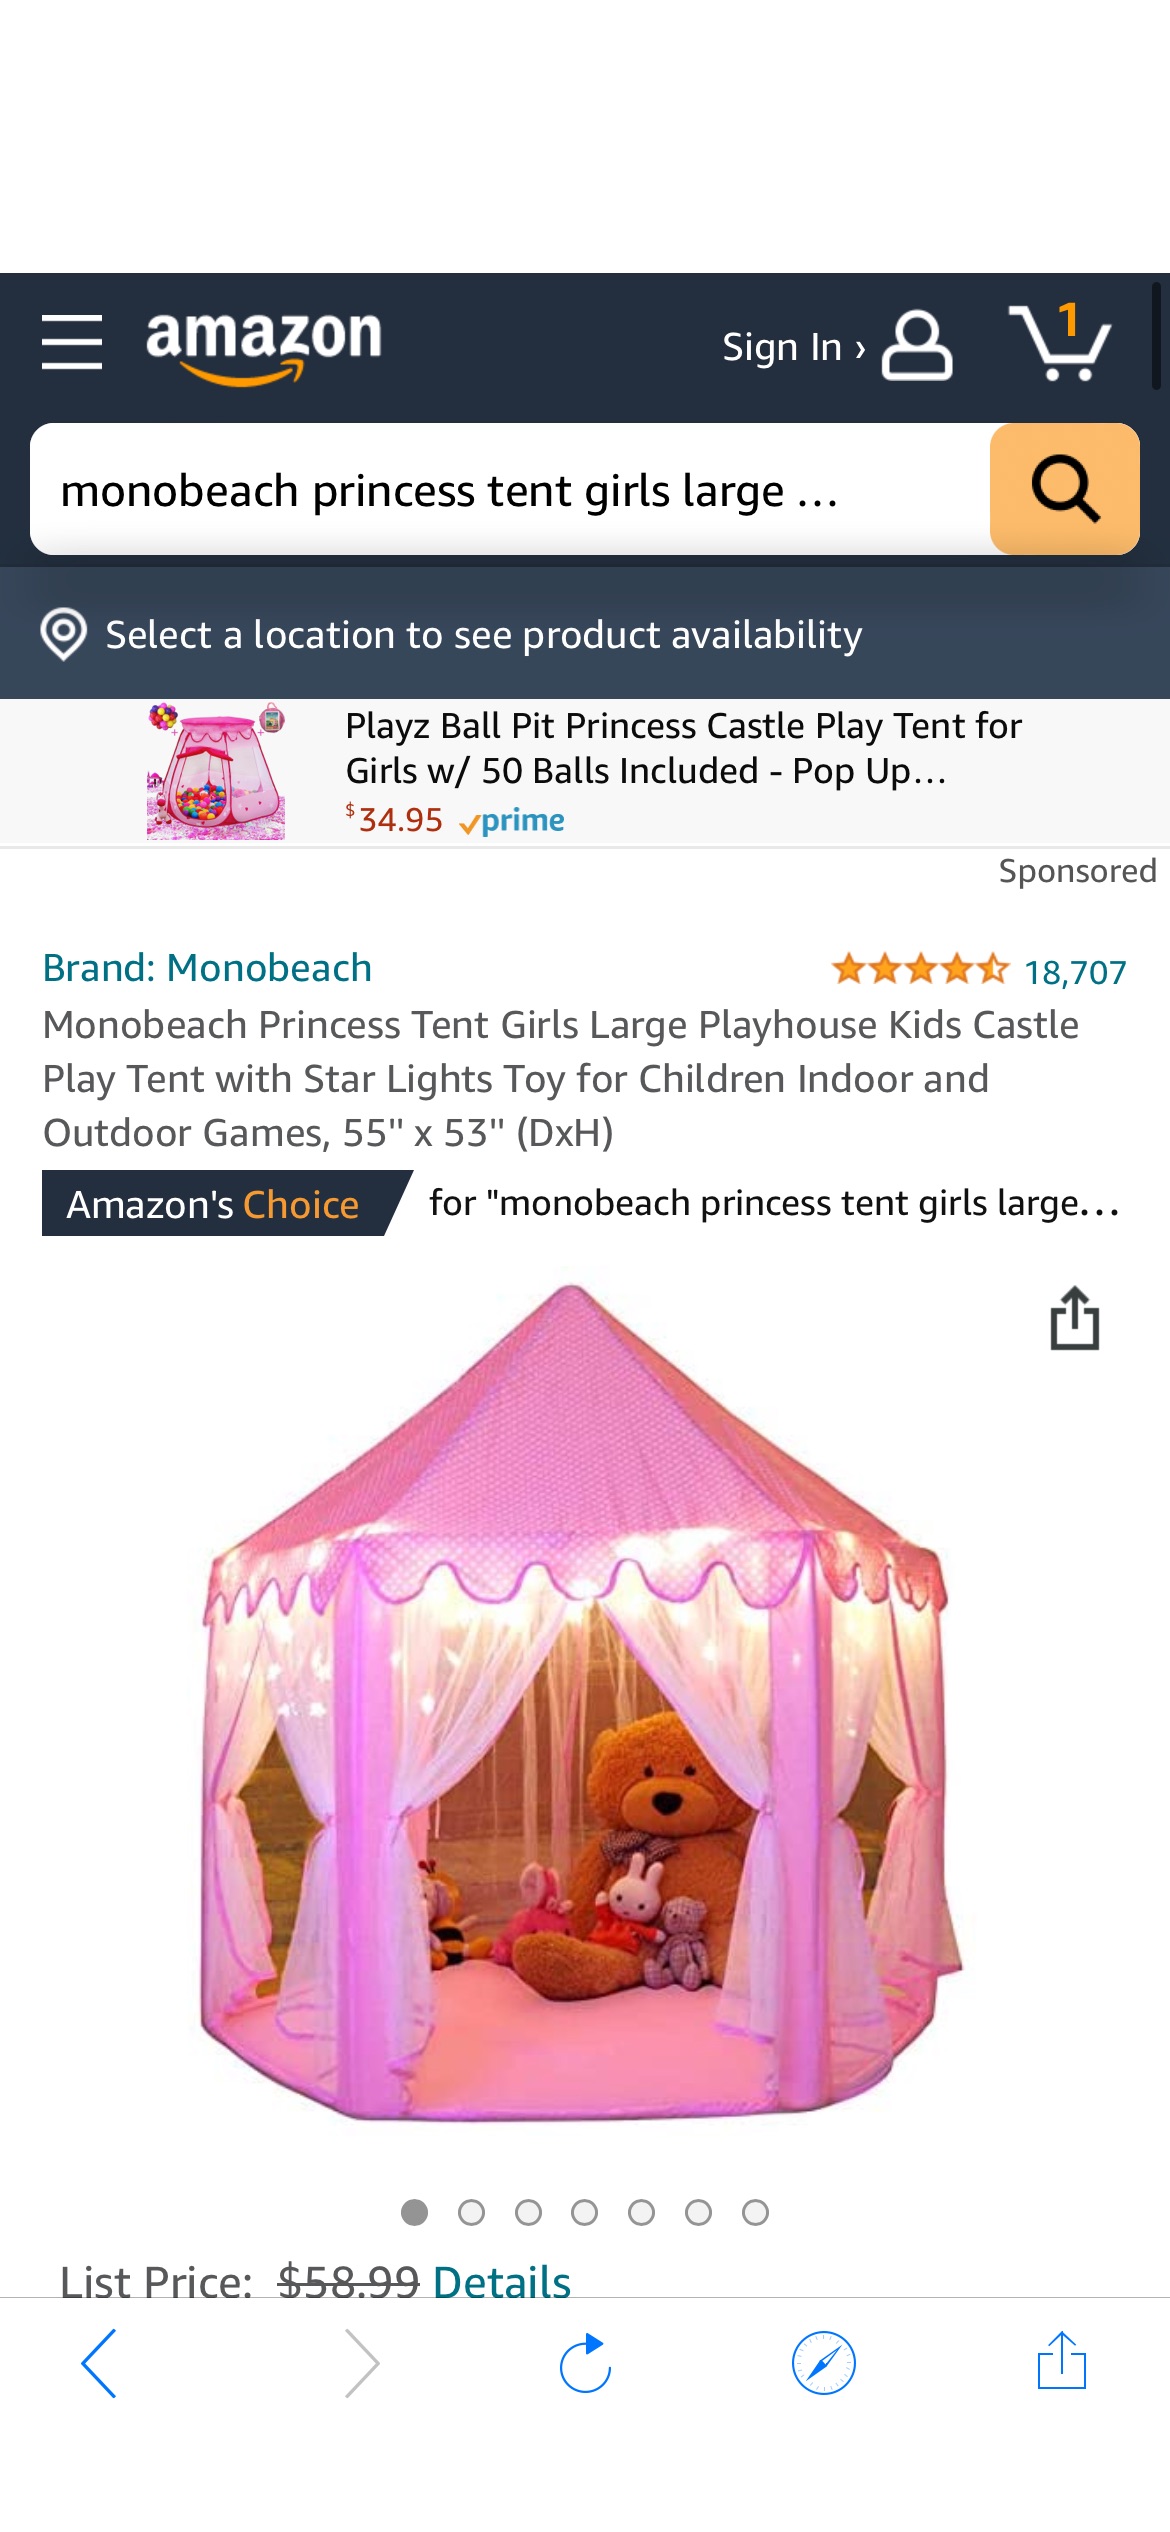 Amazon.com: Monobeach Princess Tent Girls Large Playhouse Kids Castle Play Tent with Star Lights Toy for Children Indoor and Outdoor Games超大公主风儿童帐篷